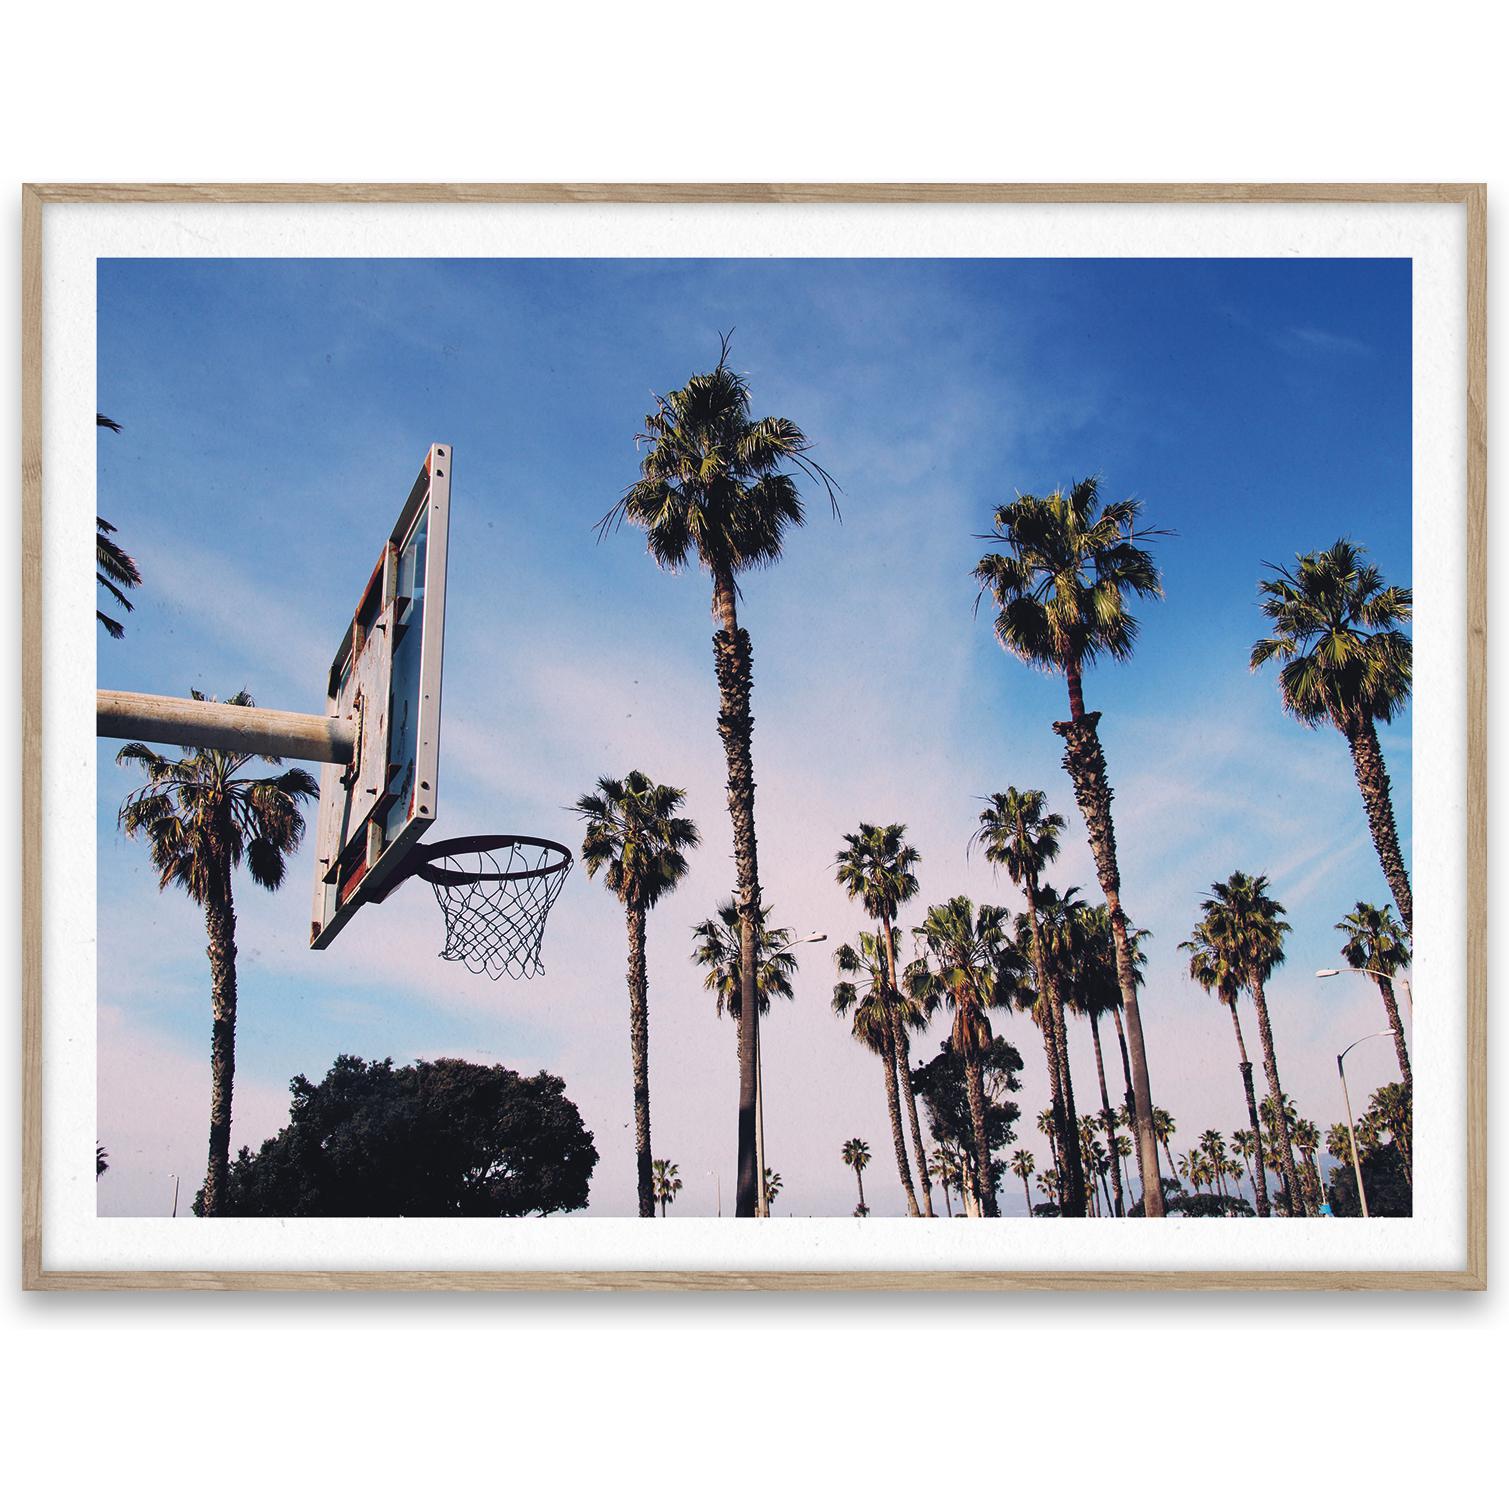 Paper Collective Cities of Basketball 02, Los Angeles plakat, 30x40 cm